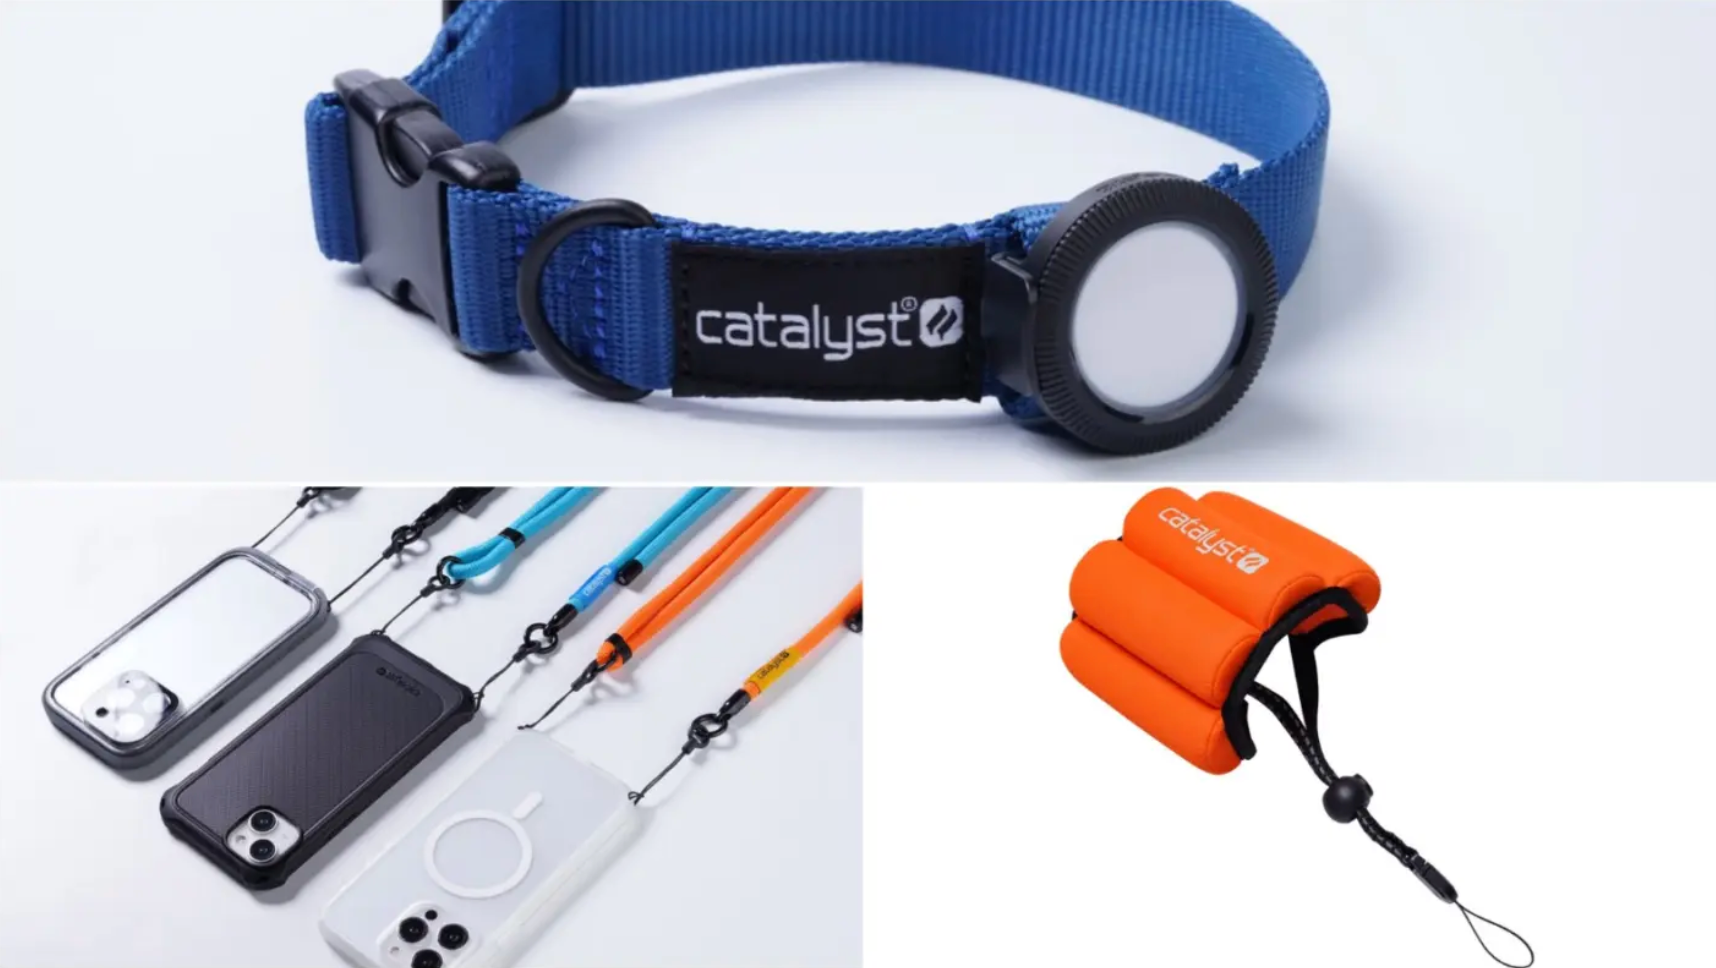 Catalyst launches rather diverse set of accessories at CES